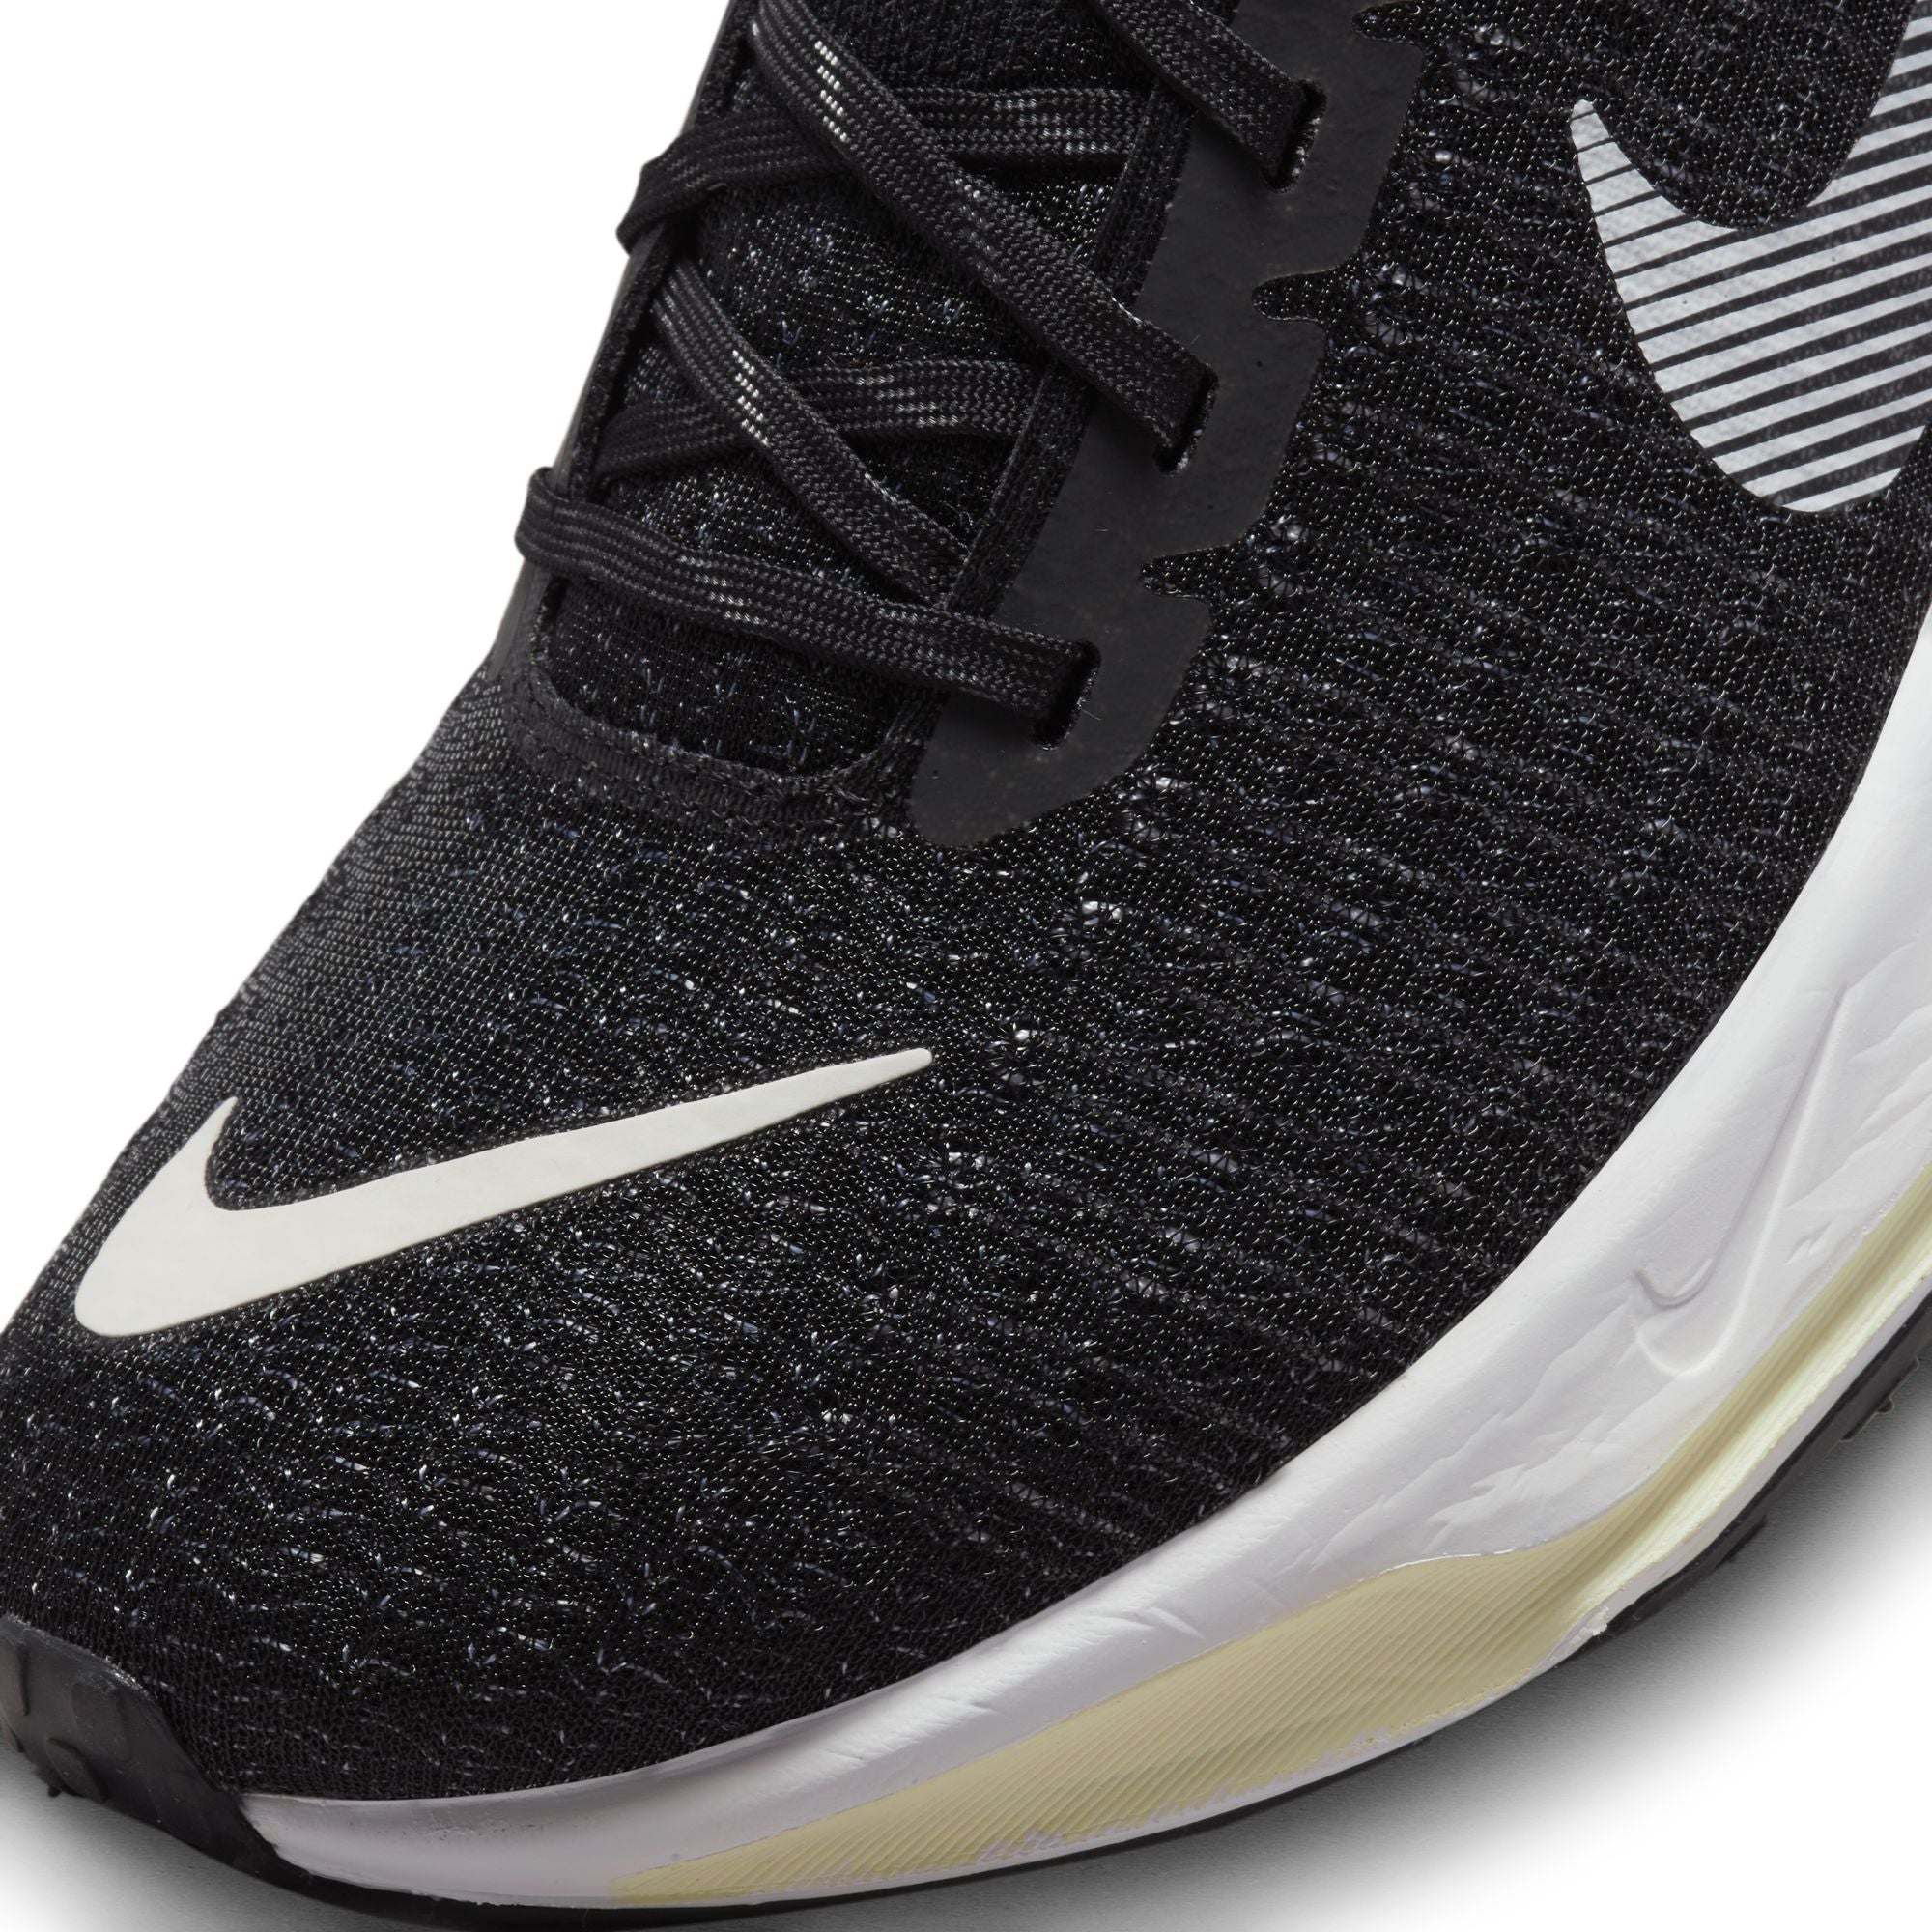 Nike Invincible 3 Review 2023: Plush Everyday Trainers for Less